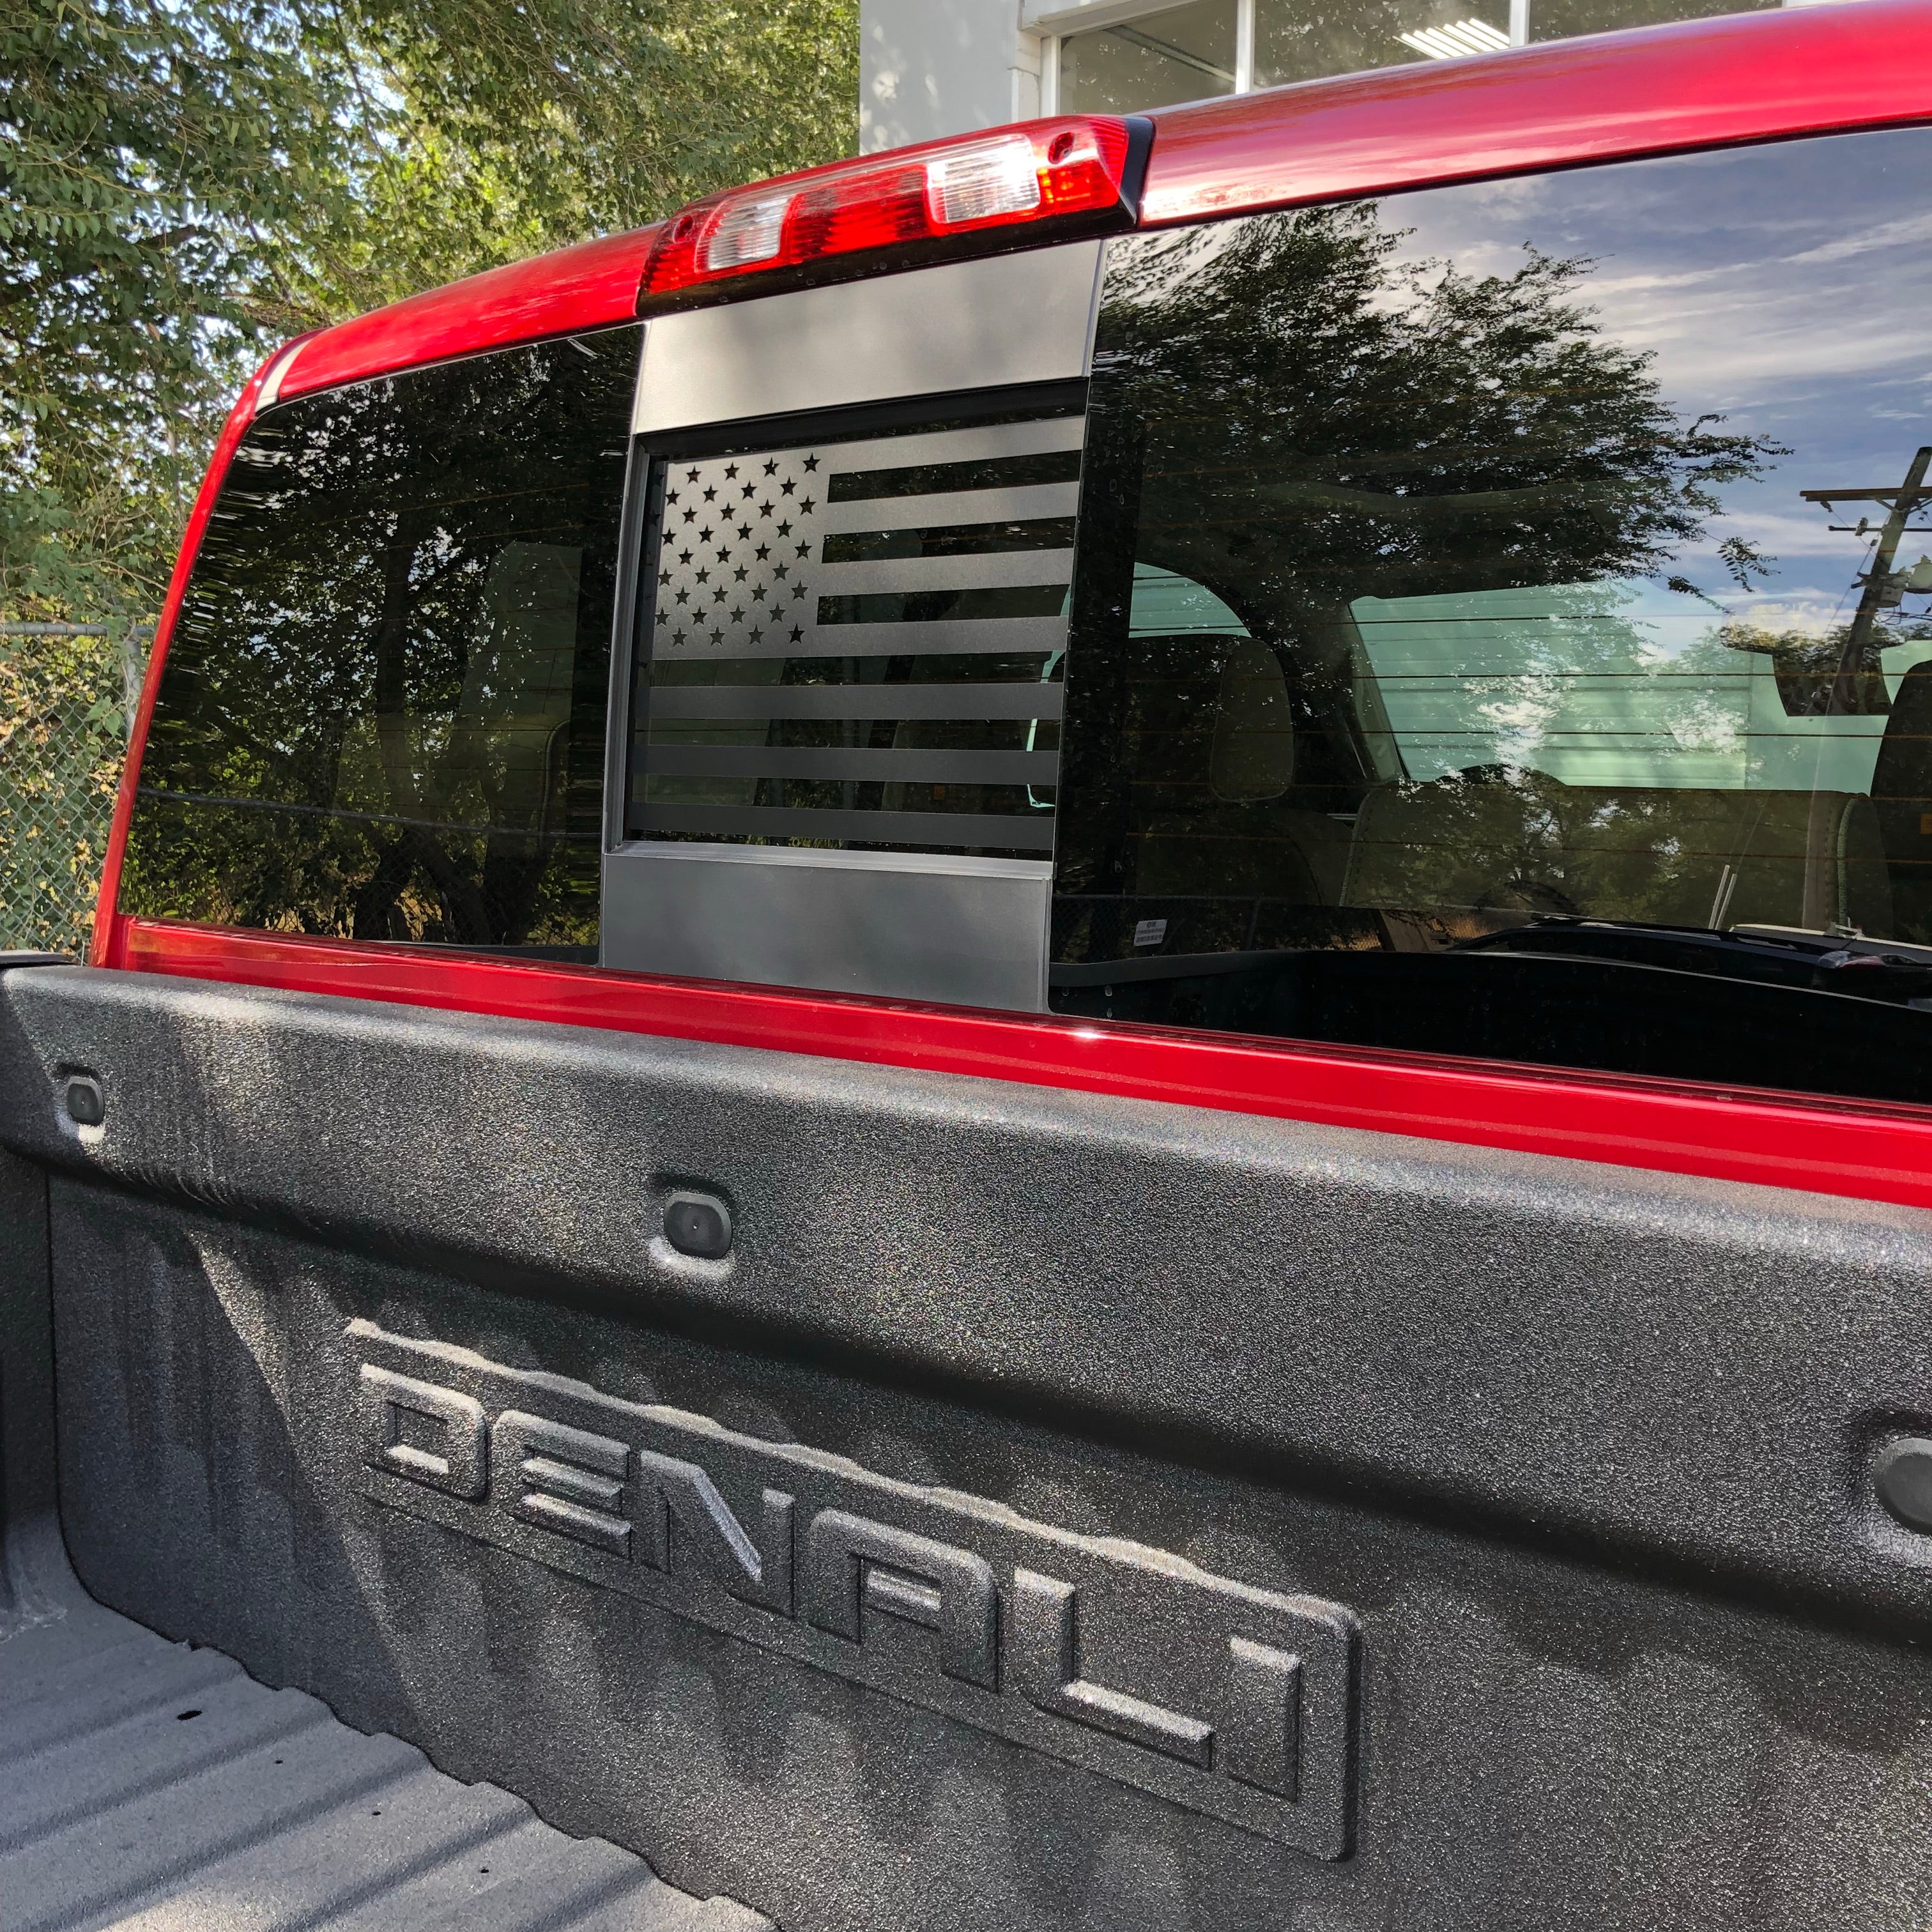 Chevy / GMC Silverado / Sierra Back Middle Window American Flag Decal Elevated Auto Styling